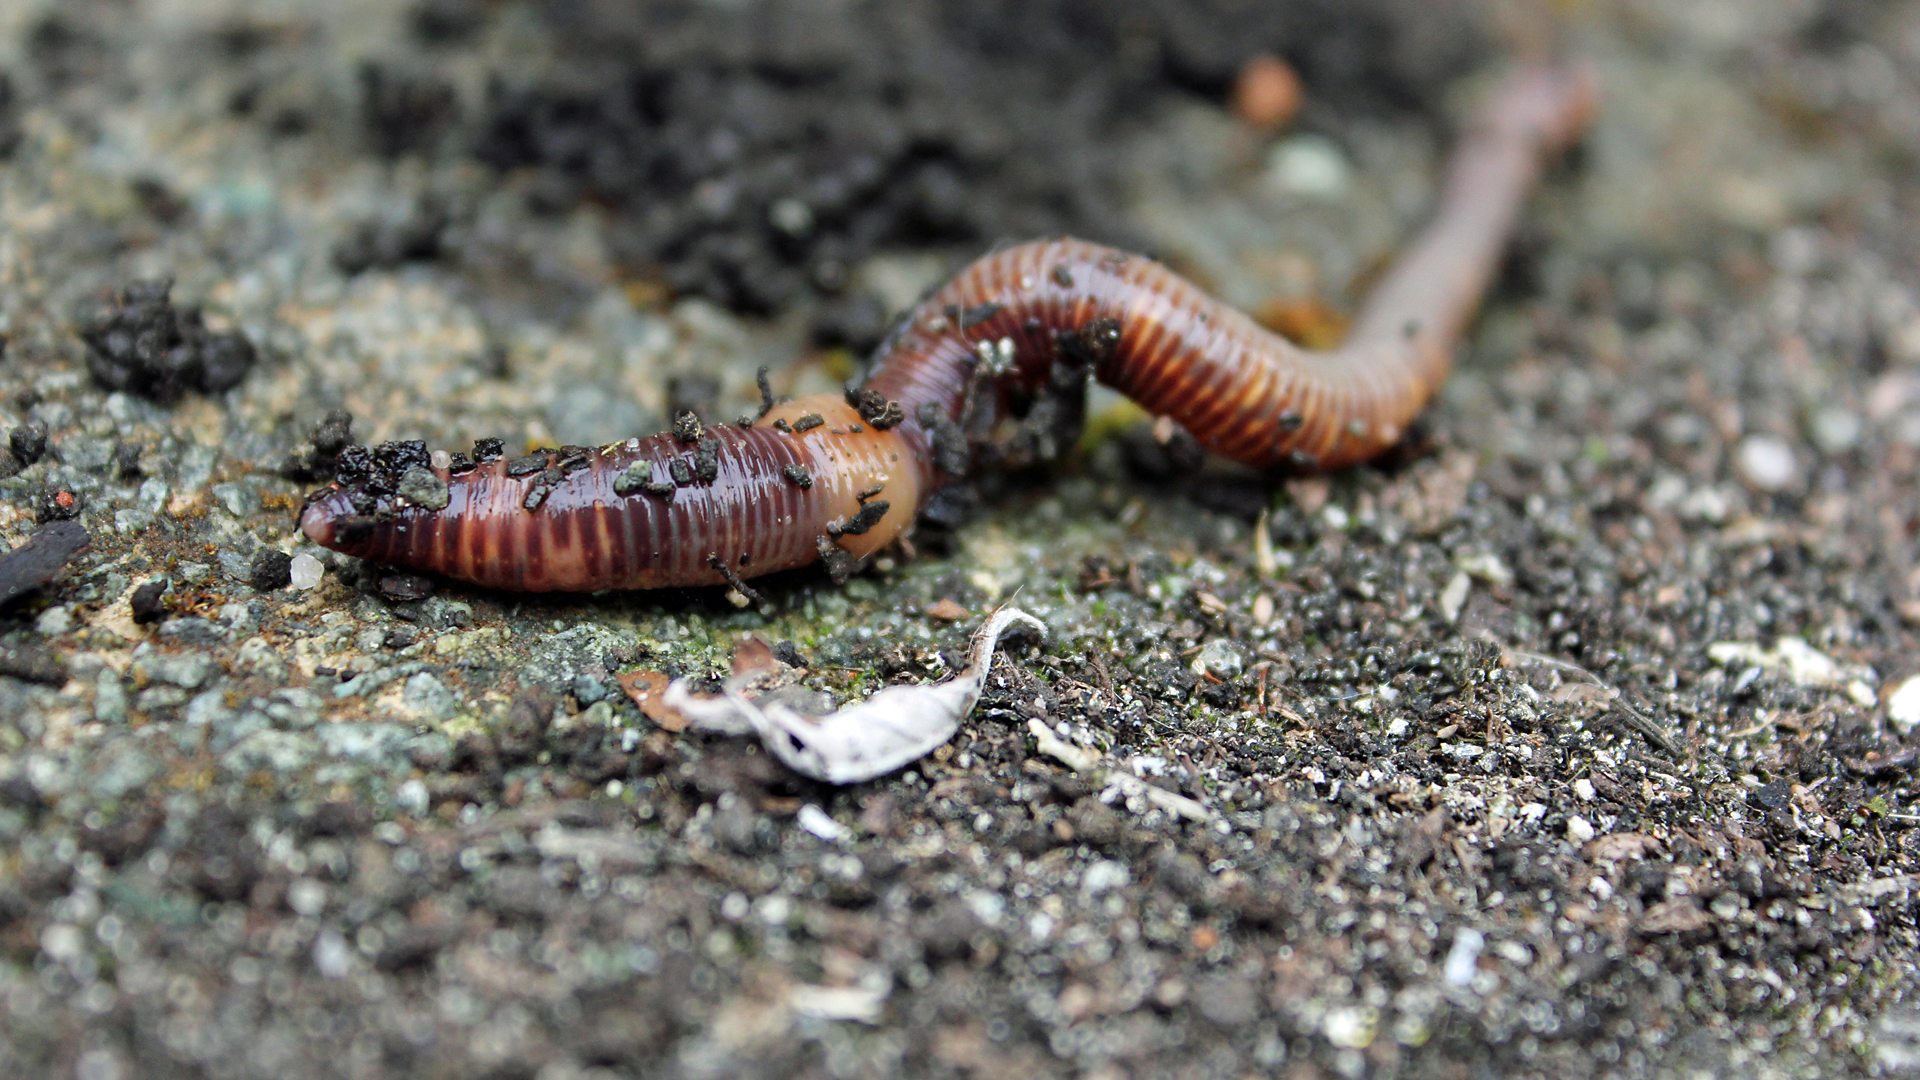 BBC Radio 4 - Radio 4 in Four - Several surprising facts about worms